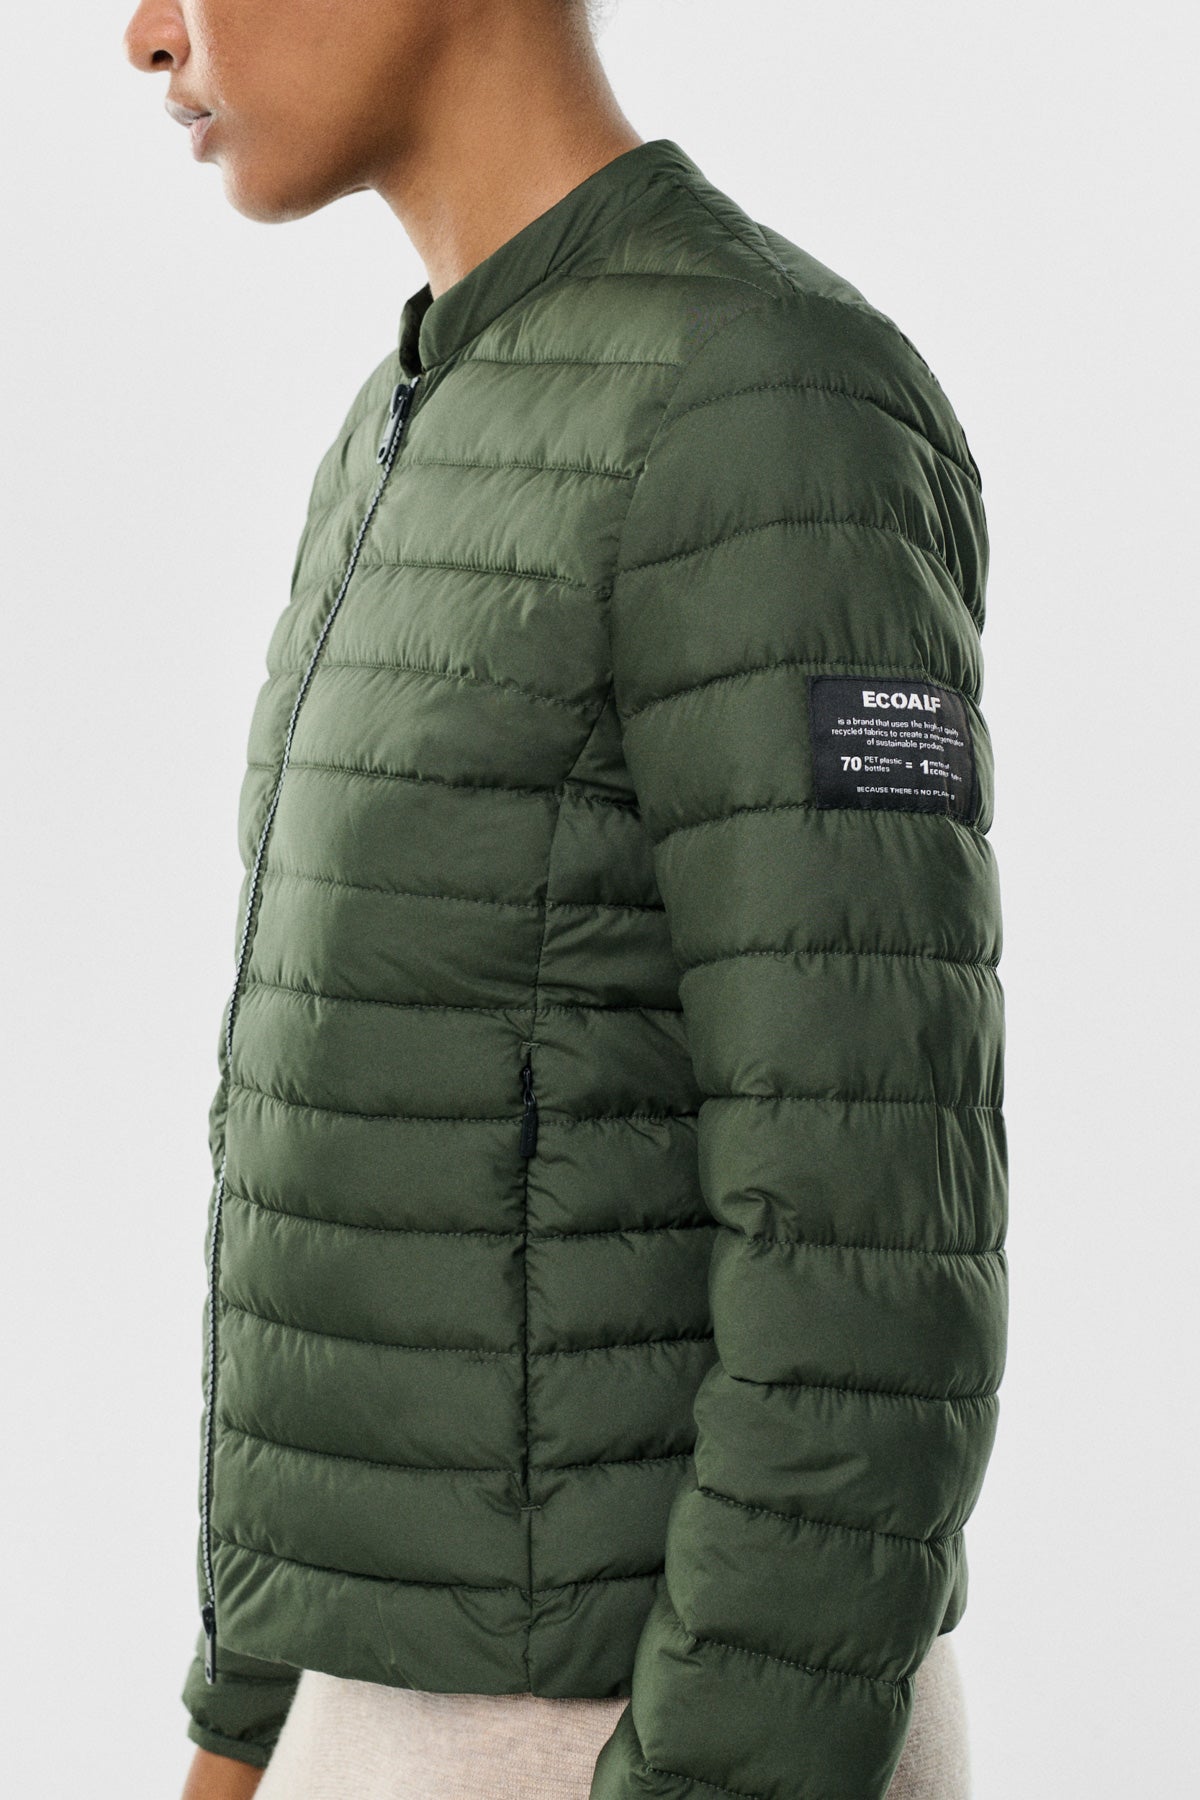 FOREST NIGHT AIA JACKET